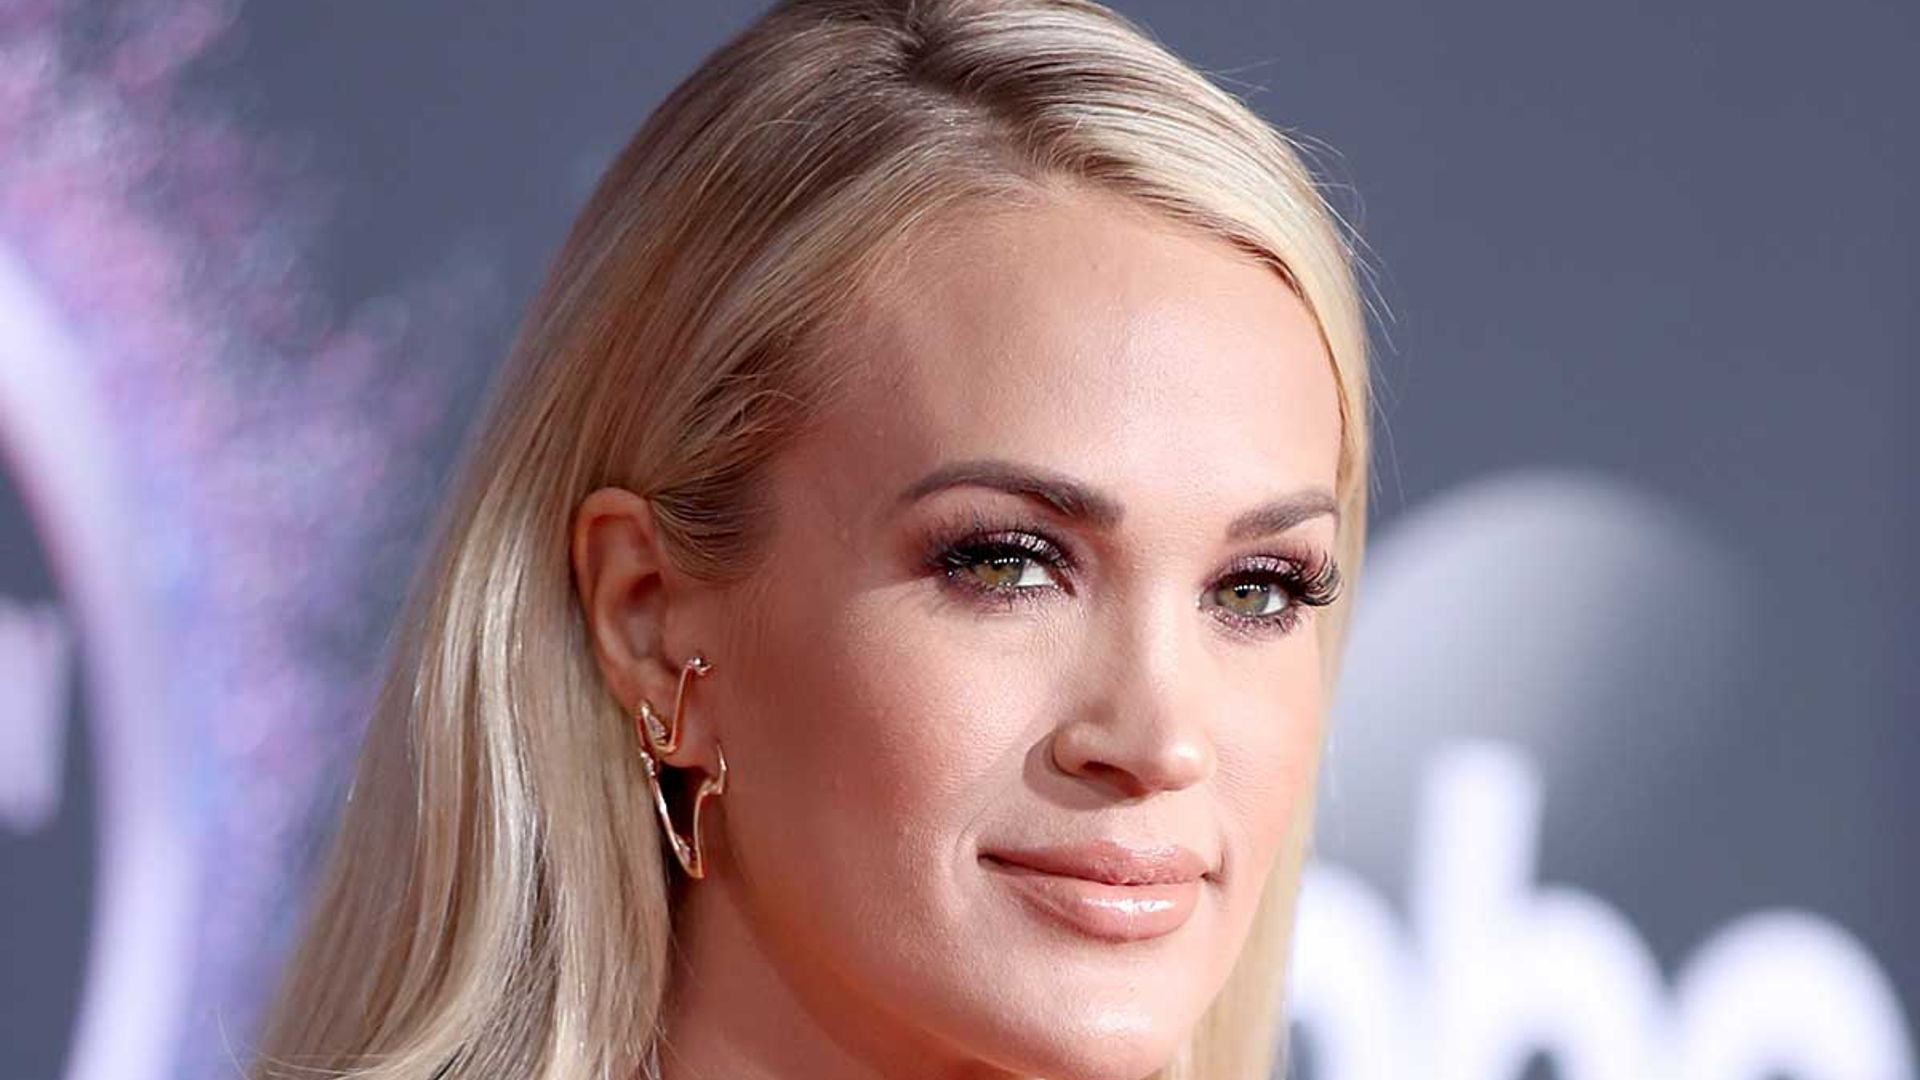 Carrie Underwood, 39, Has Epic Legs In Cut-Off Jeans In IG Pics